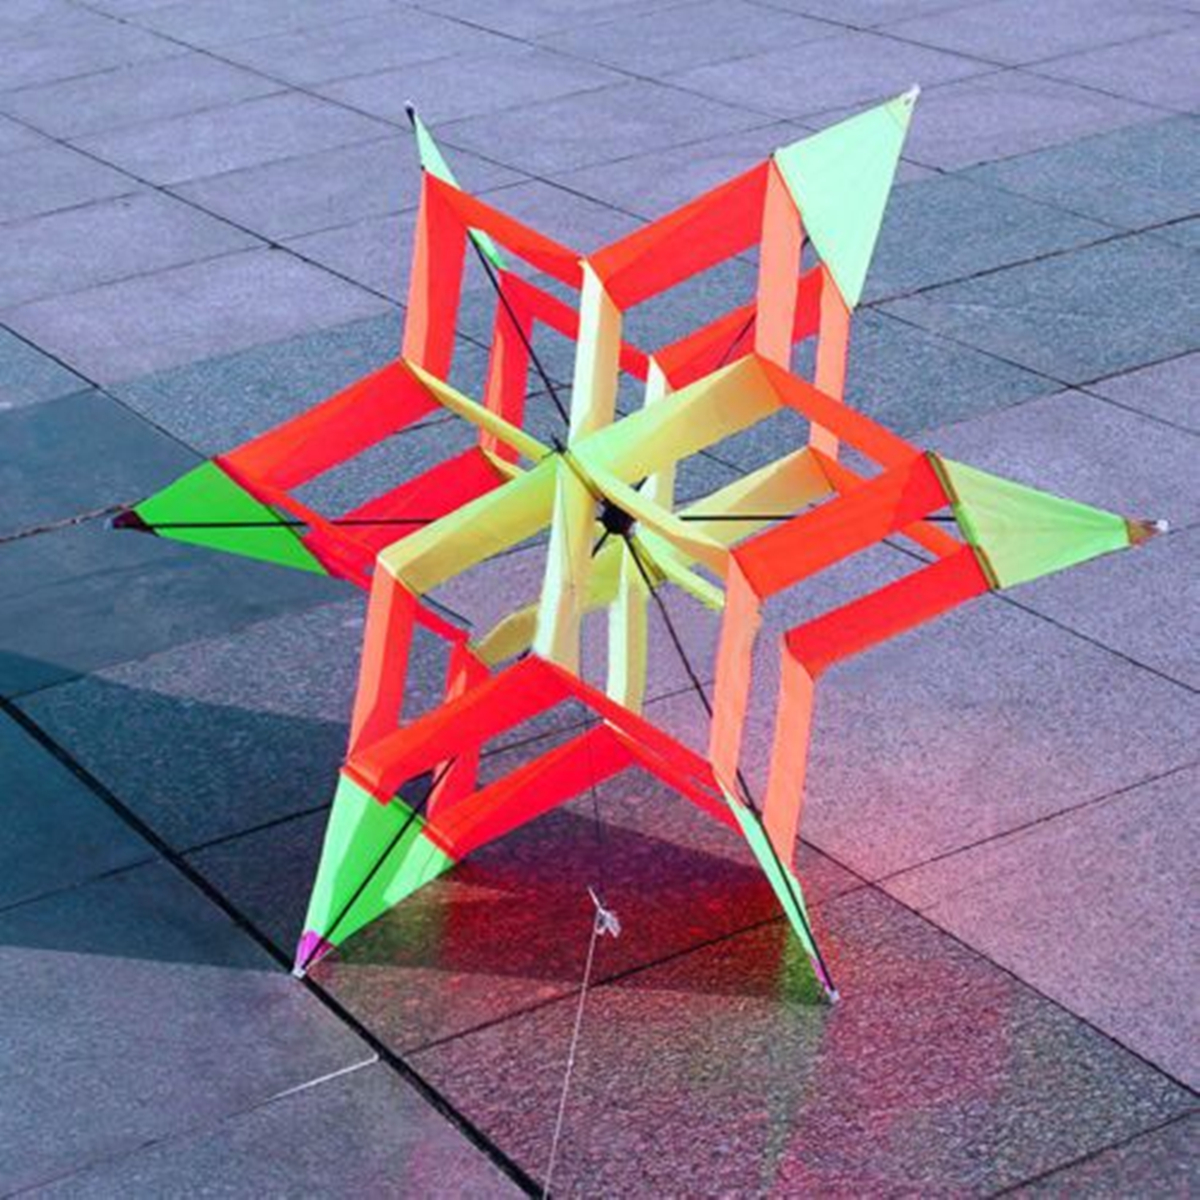 3D Colorful Flower Kite Single Line Outdoor sports Toy Light Wind Flying Kids 8